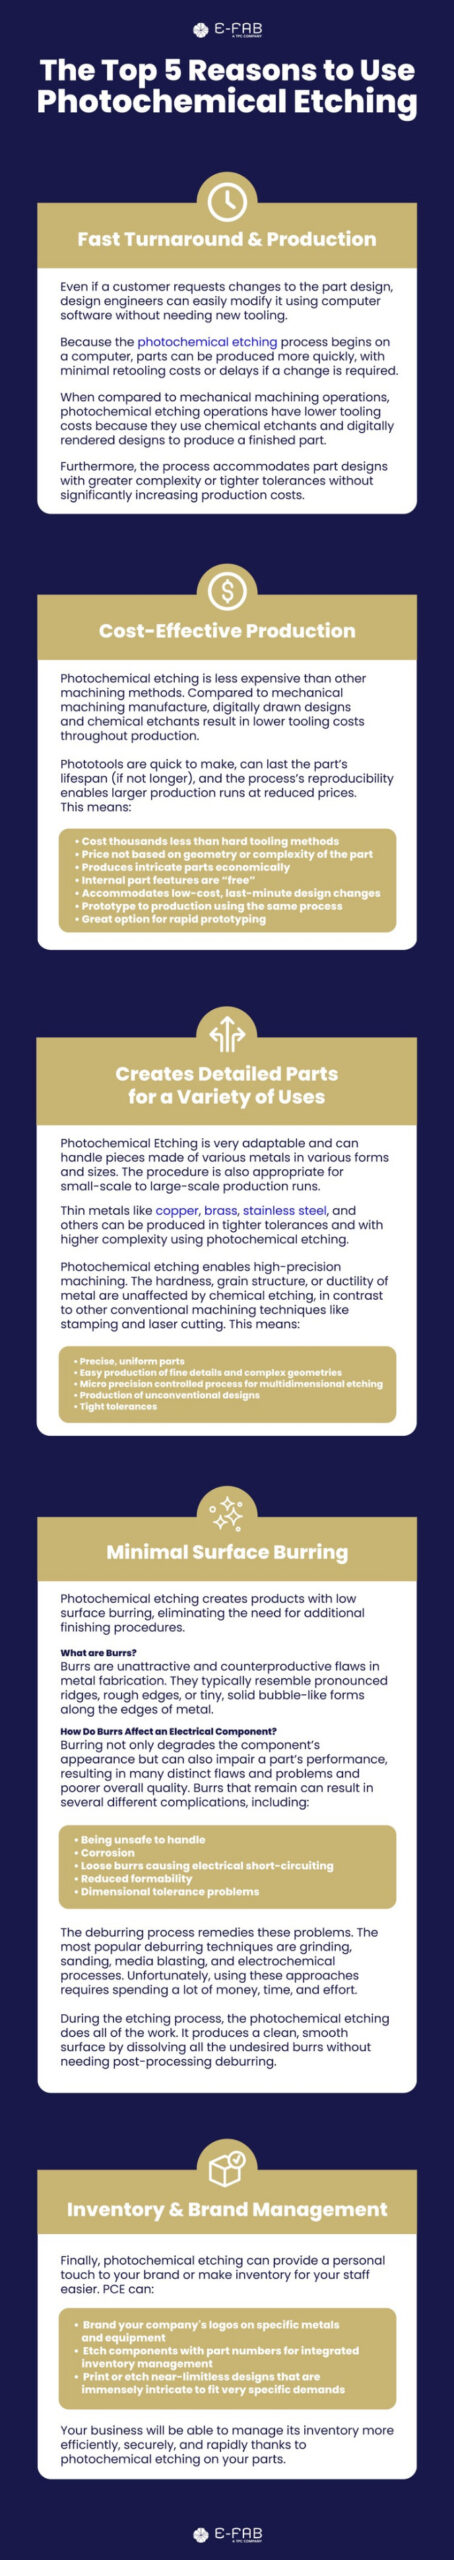 Reasons to Use Photochemical Etching - Infographic